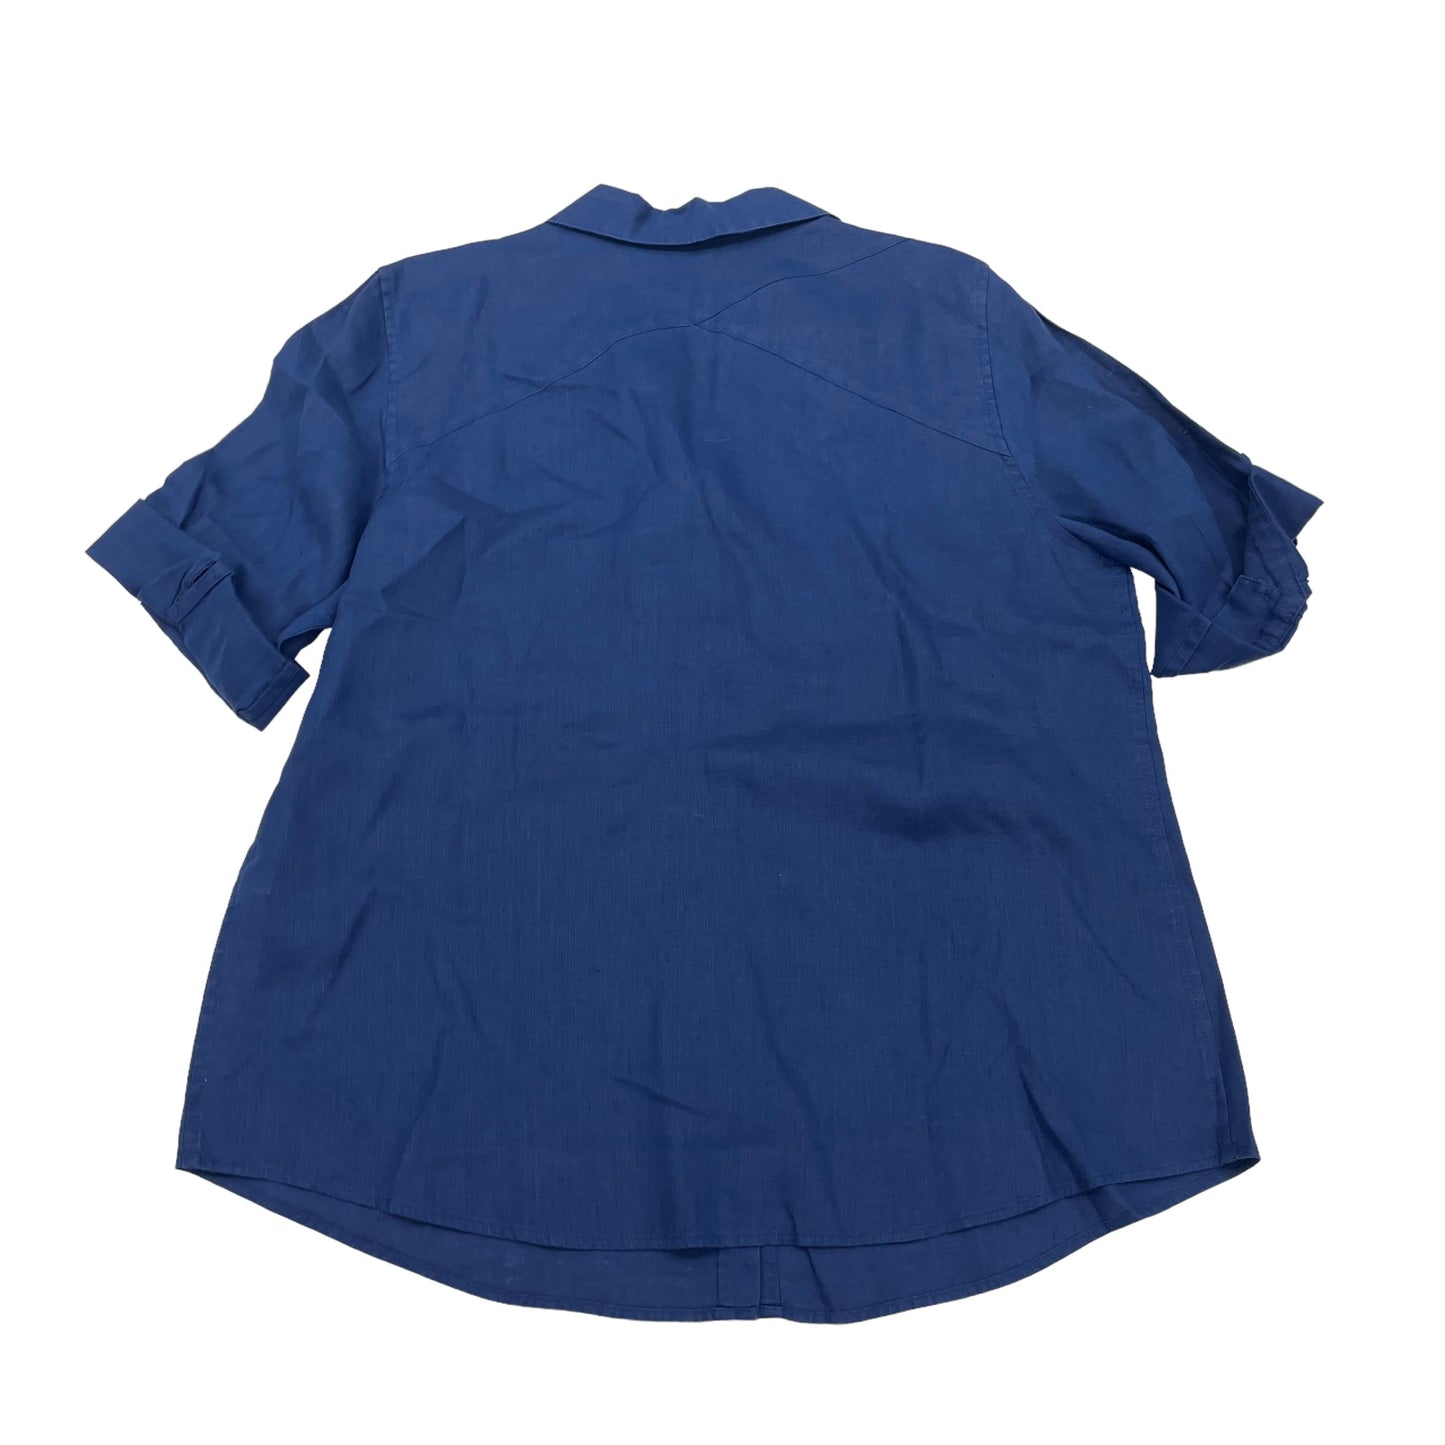 BLUE CHICOS TOP SS, Size L